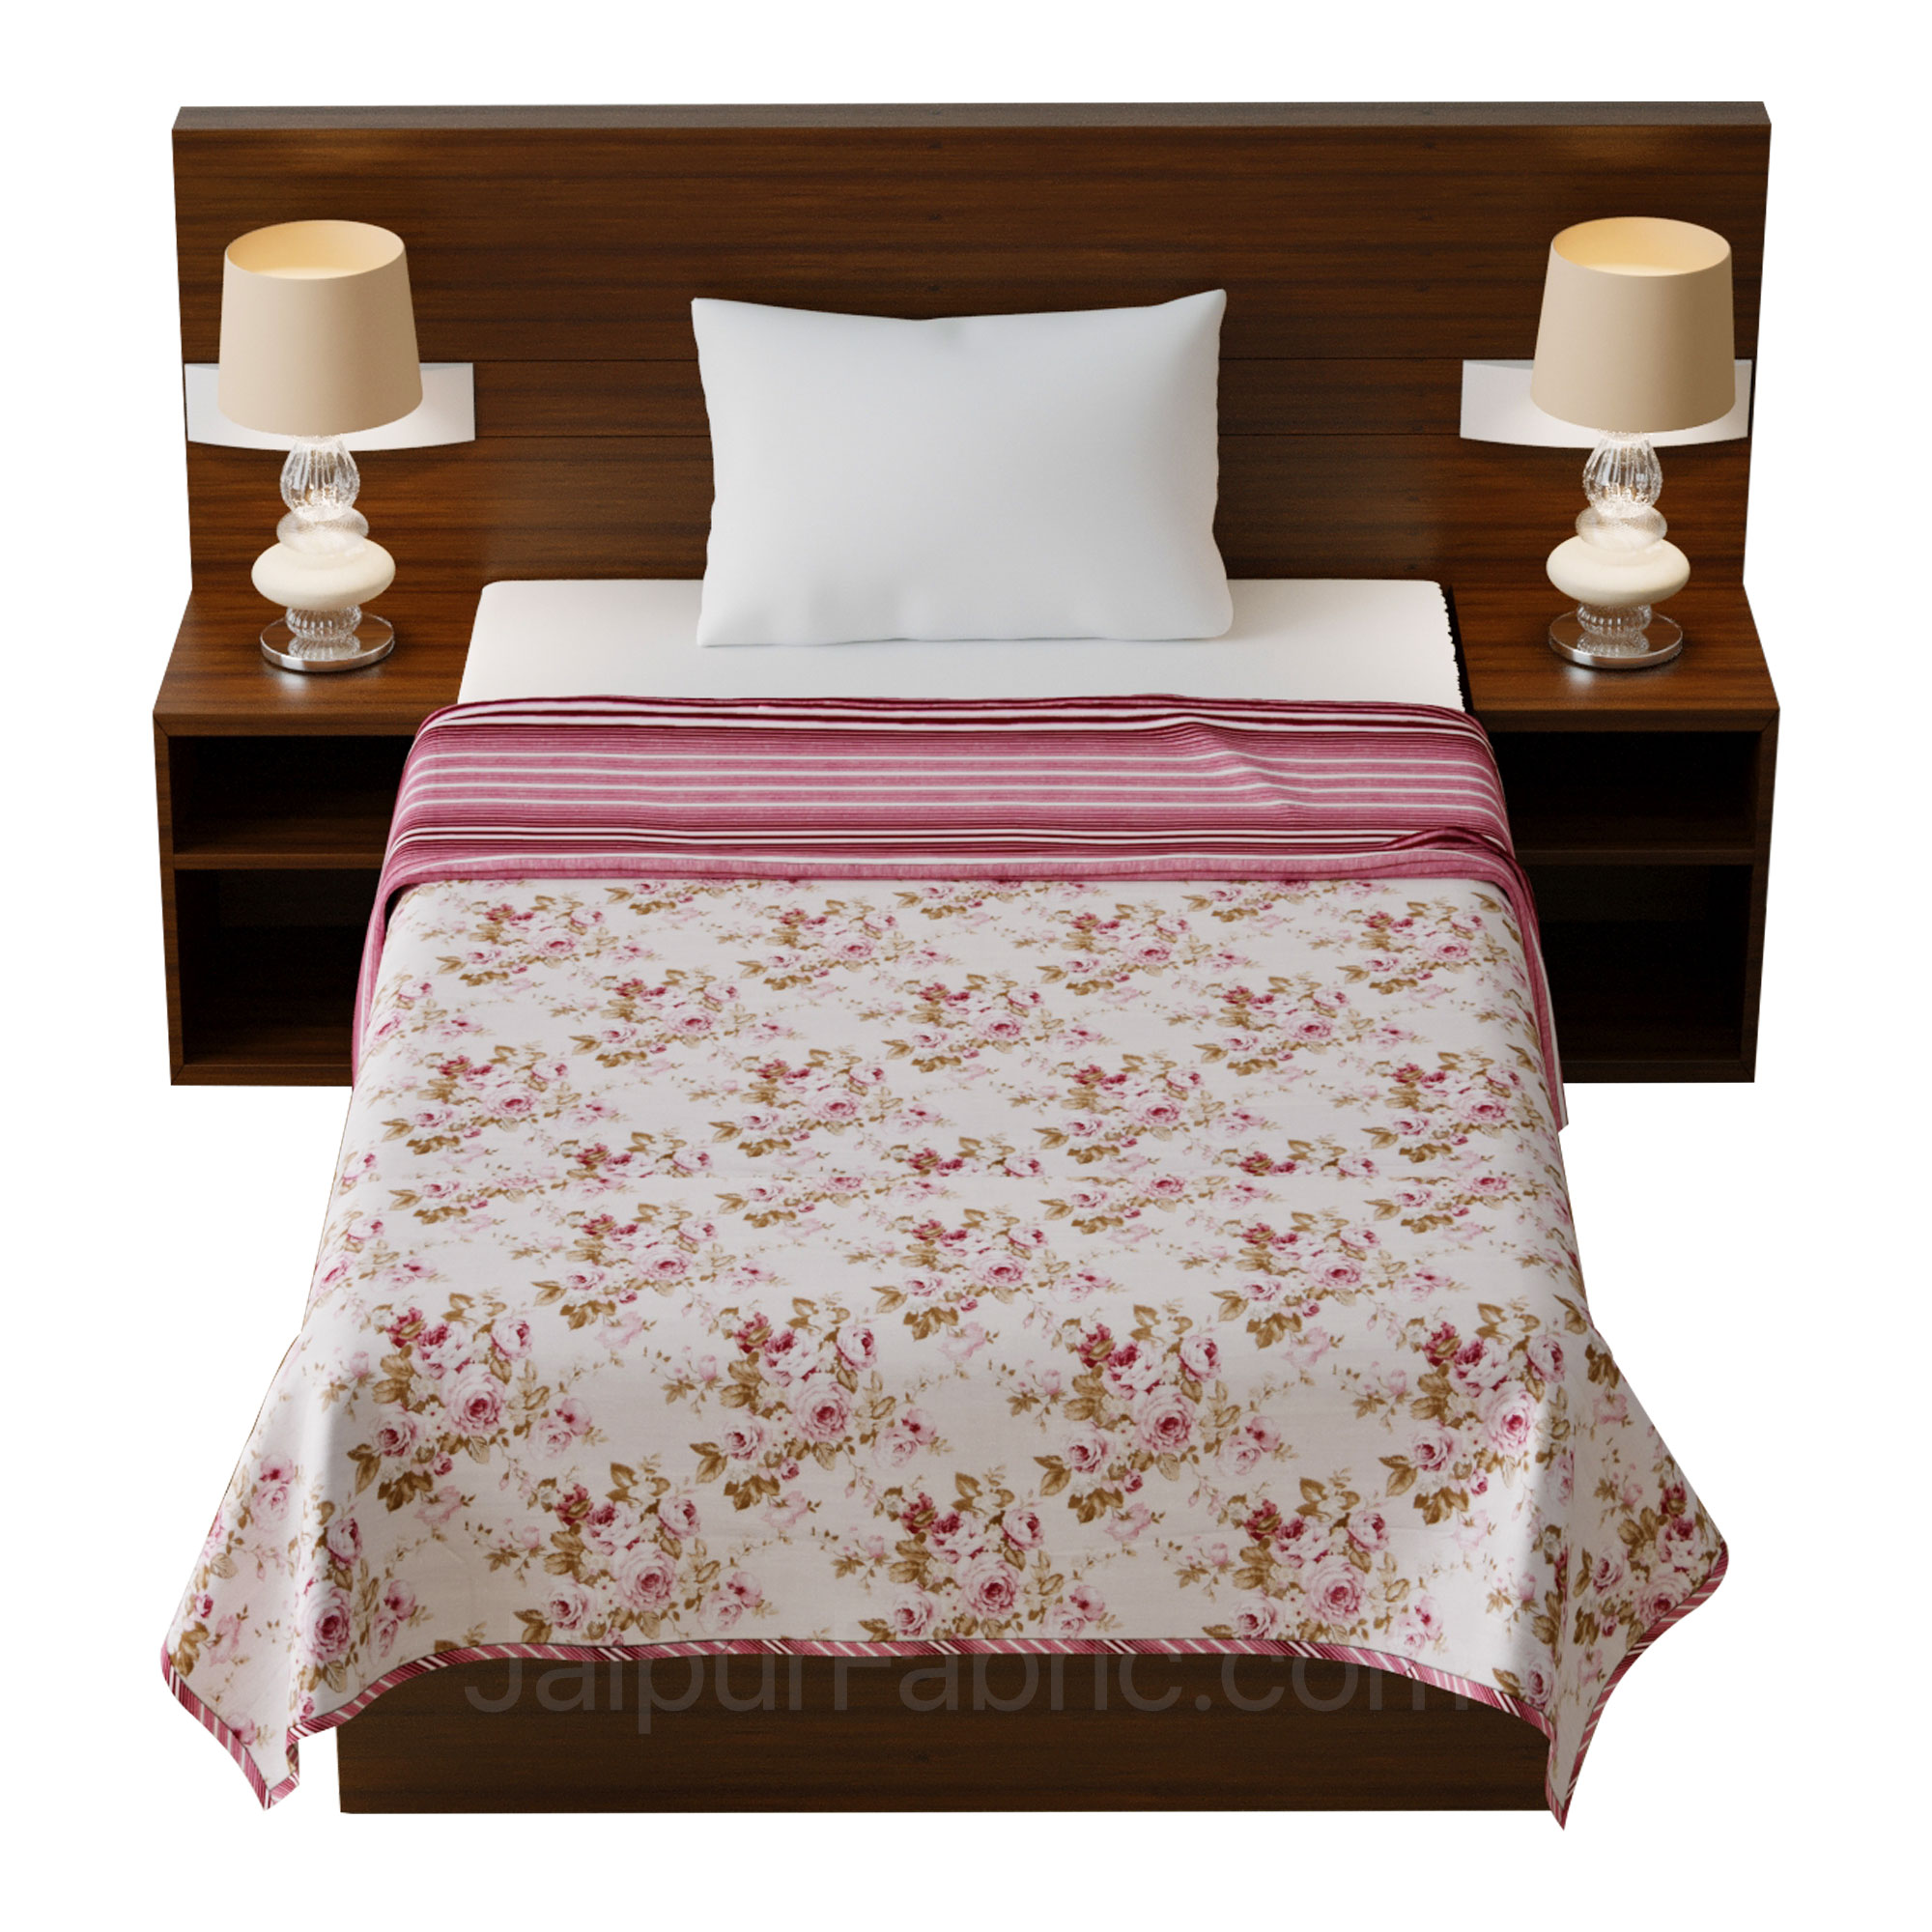 Flowers Bunch Pink Cotton Soft Touch Reversible Single Bed Dohar/Blanket